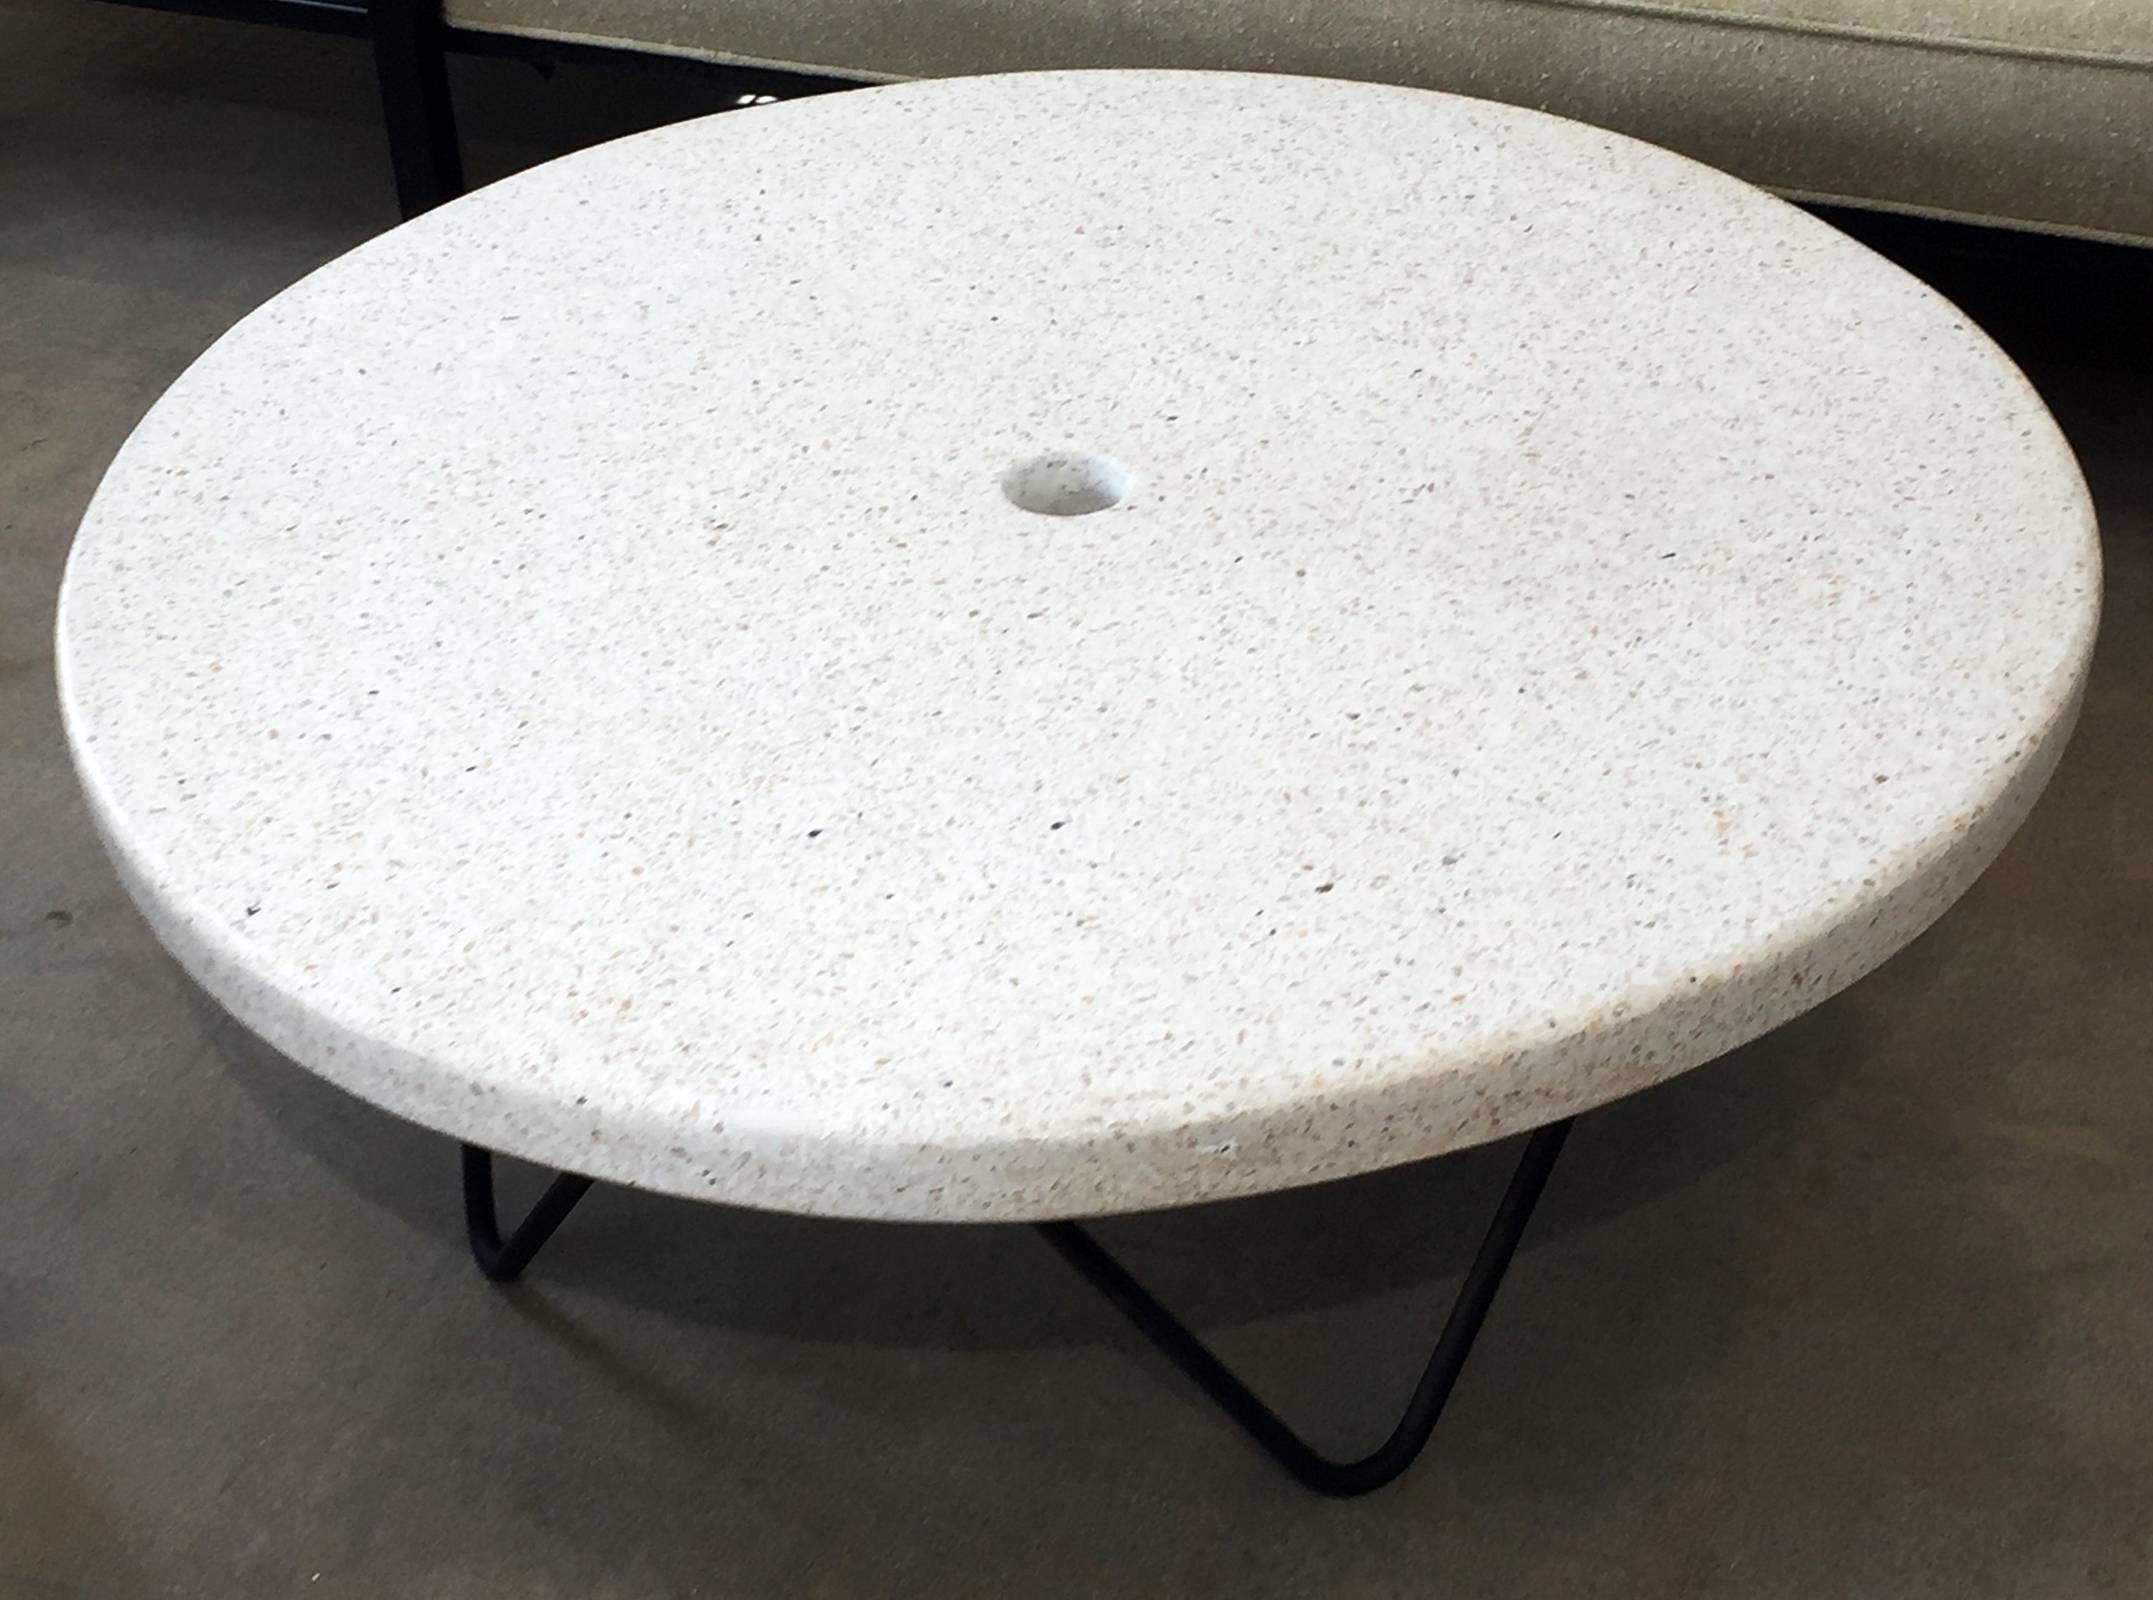 A custom Mid-Century Modern coffee table for exterior use. 2" thick poured terrazzo top with bent wrought iron rod base in the style of William "Billy" Haines. Top has a 2" diameter hole for an umbrella. We can provide a brass